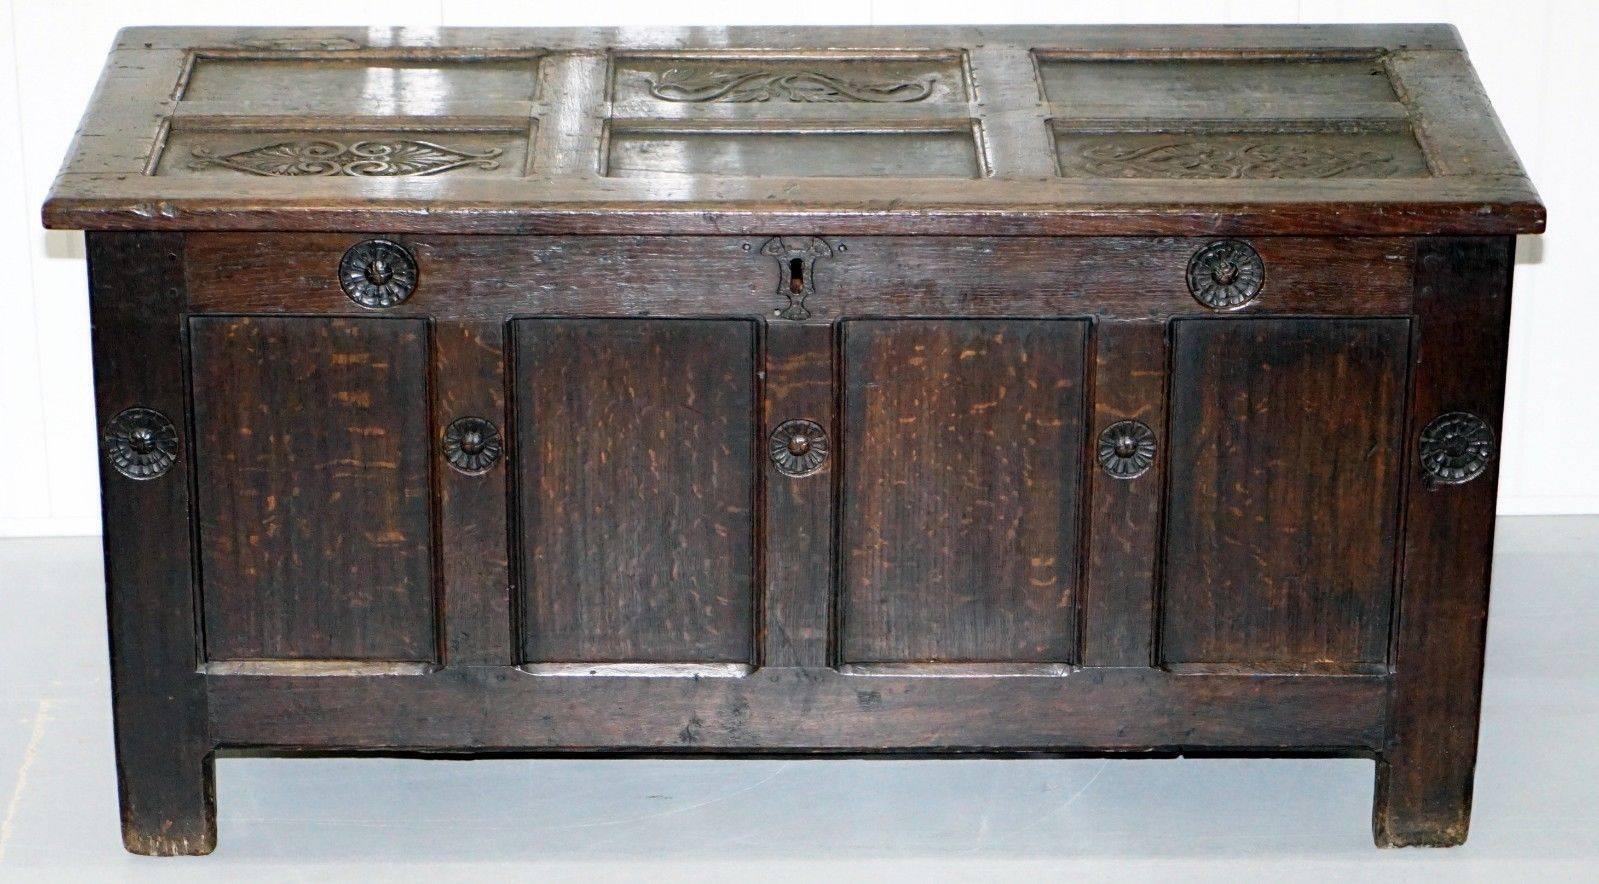 We are delighted to offer for sale this stunning handmade in England early 16th century Gothic coffer / chest.

There are multiple high definition super-sized pictures at the bottom of this page

This is one of the best looking pieces I have